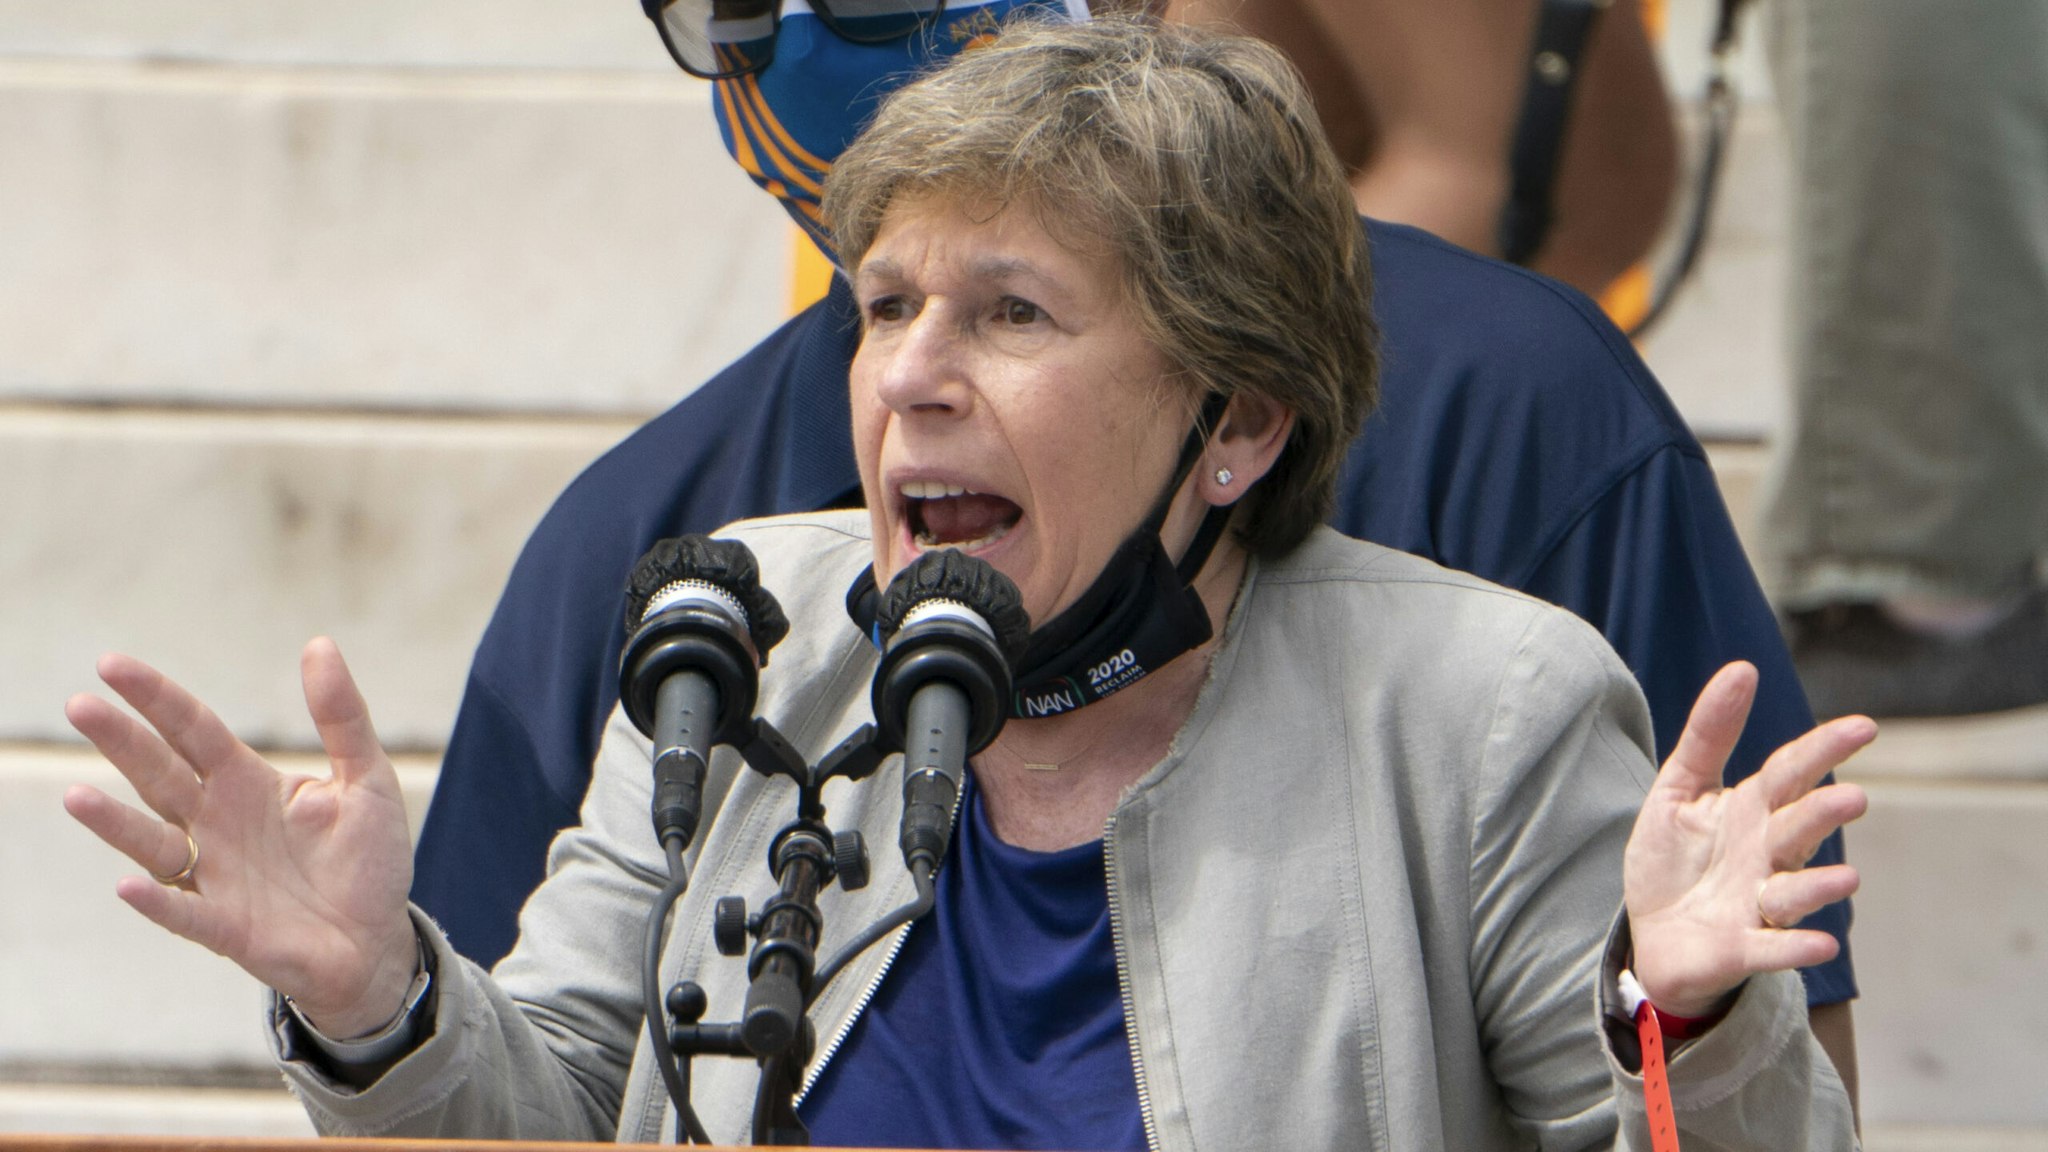 Randi Weingarten, president of American Federation of Teachers, speaks, along with Everett Kelley, left, National President of the American Federation of Government Employees, during the "Commitment March: Get Your Knee Off Our Necks" protest against racism and police brutality, on August 28, 2020, in Washington, DC. - Anti-racism protesters marched on the streets of the US capital on Friday, after a white officer's shooting of African American Jacob Blake. The protester also marked the 57th anniversary of civil rights leader Martin Luther King's historic "I Have a Dream" speech delivered at the Lincoln Memorial.